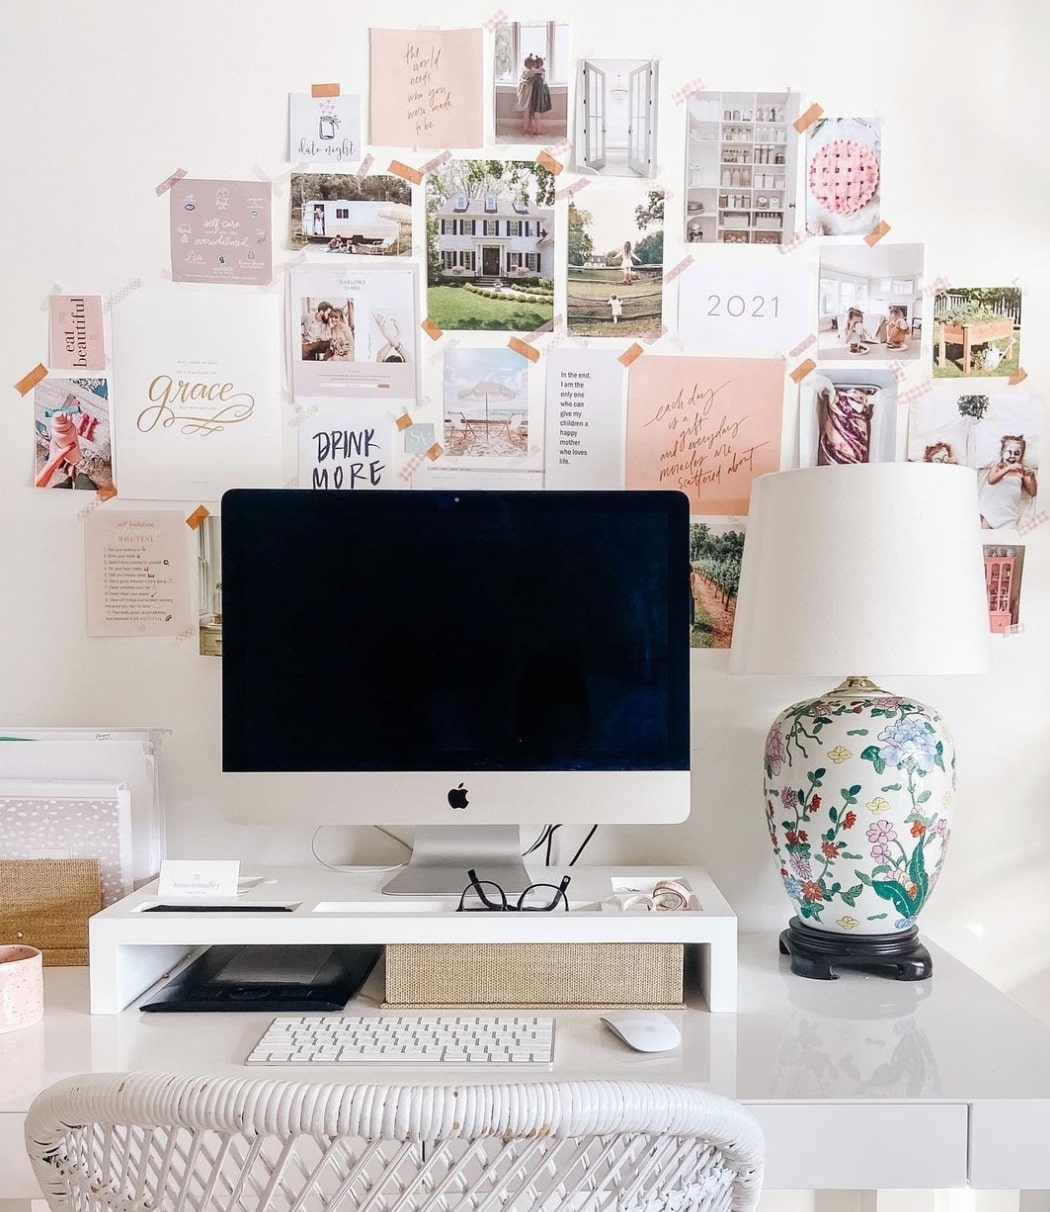 office wall vision board. vision board example. Vision board examples. Vision board example. Examples of vision boards. Examples of a vision board. Example of a vision board. Ideas for vision board. Vision board ideas. Vision boards ideas